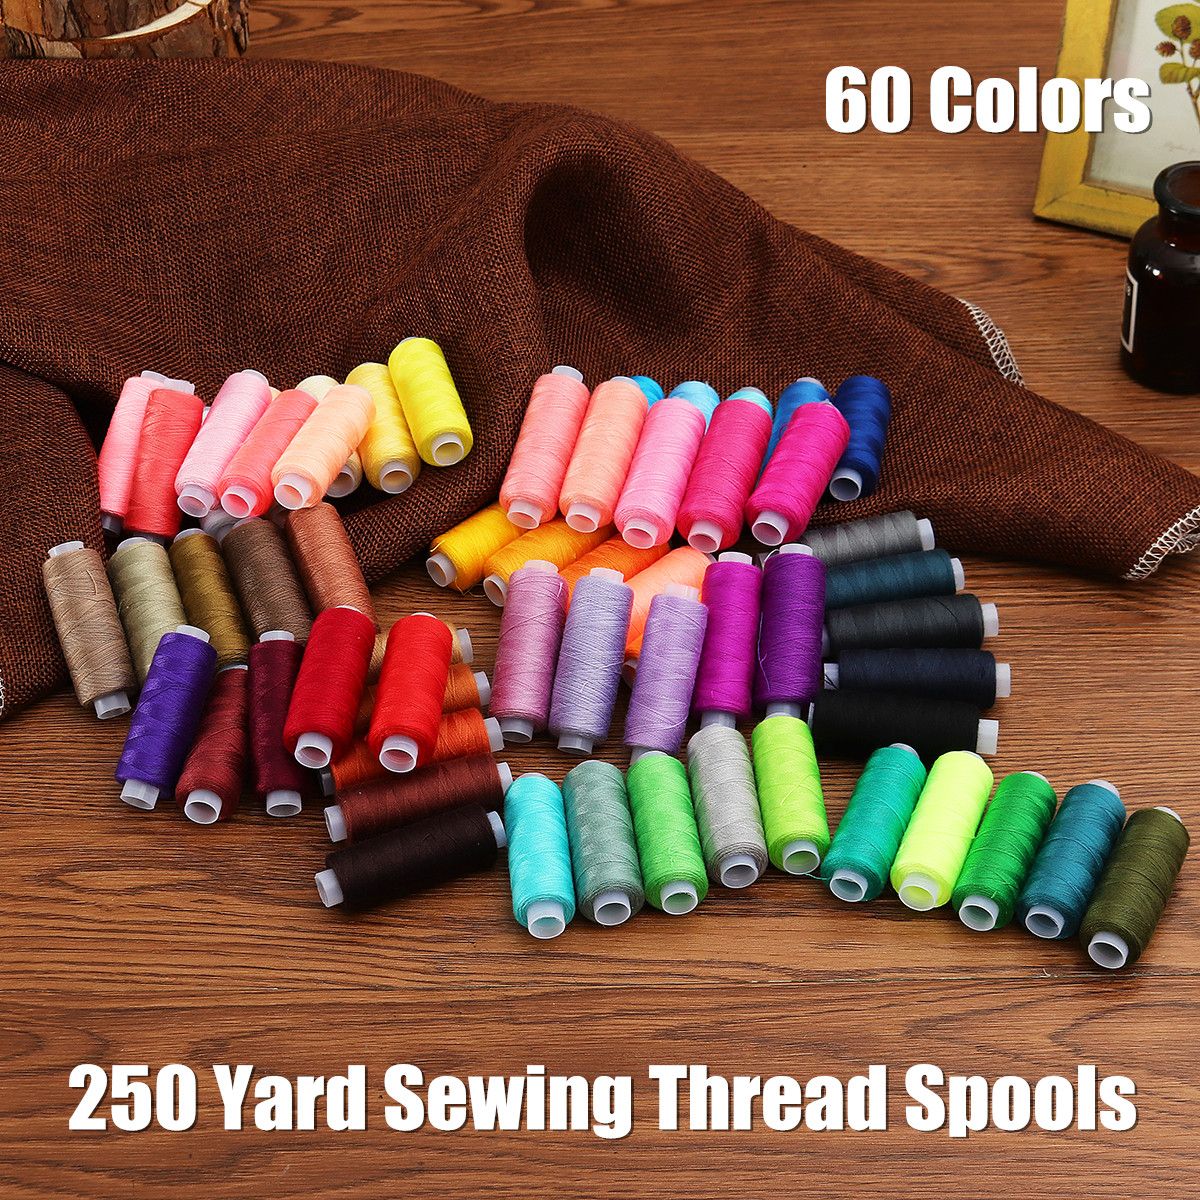 250-Yard-Spools-60-Colors-Polyester-Sewing-Thread-Reel-Machine-Hand-Cord-Tools-Set-1455189